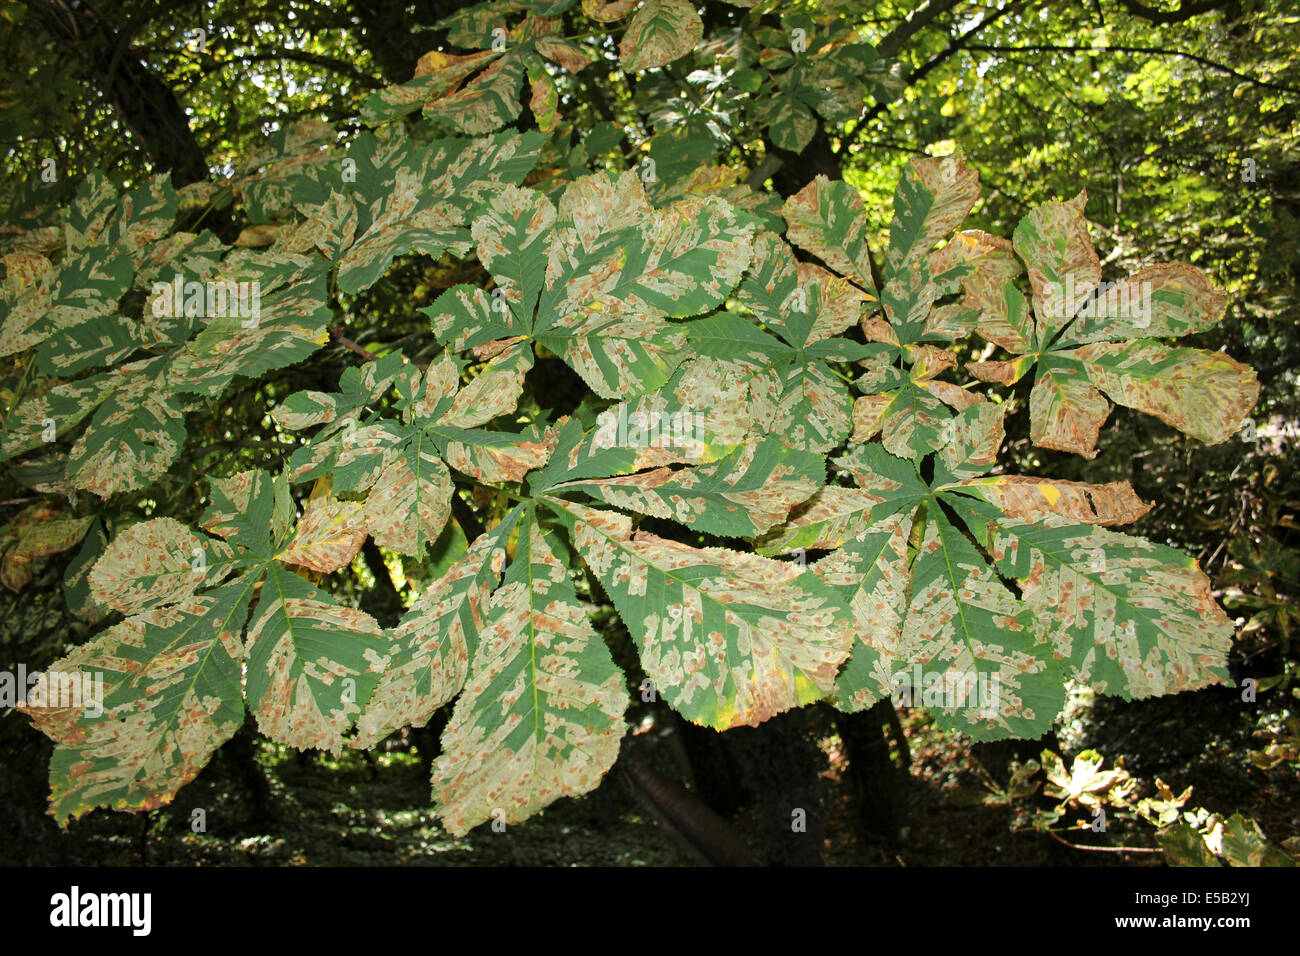 Leaf Mines On Horse-chestnut Aesculus hippocastanum leaves caused by Moth Cameraria ohridella Stock Photo